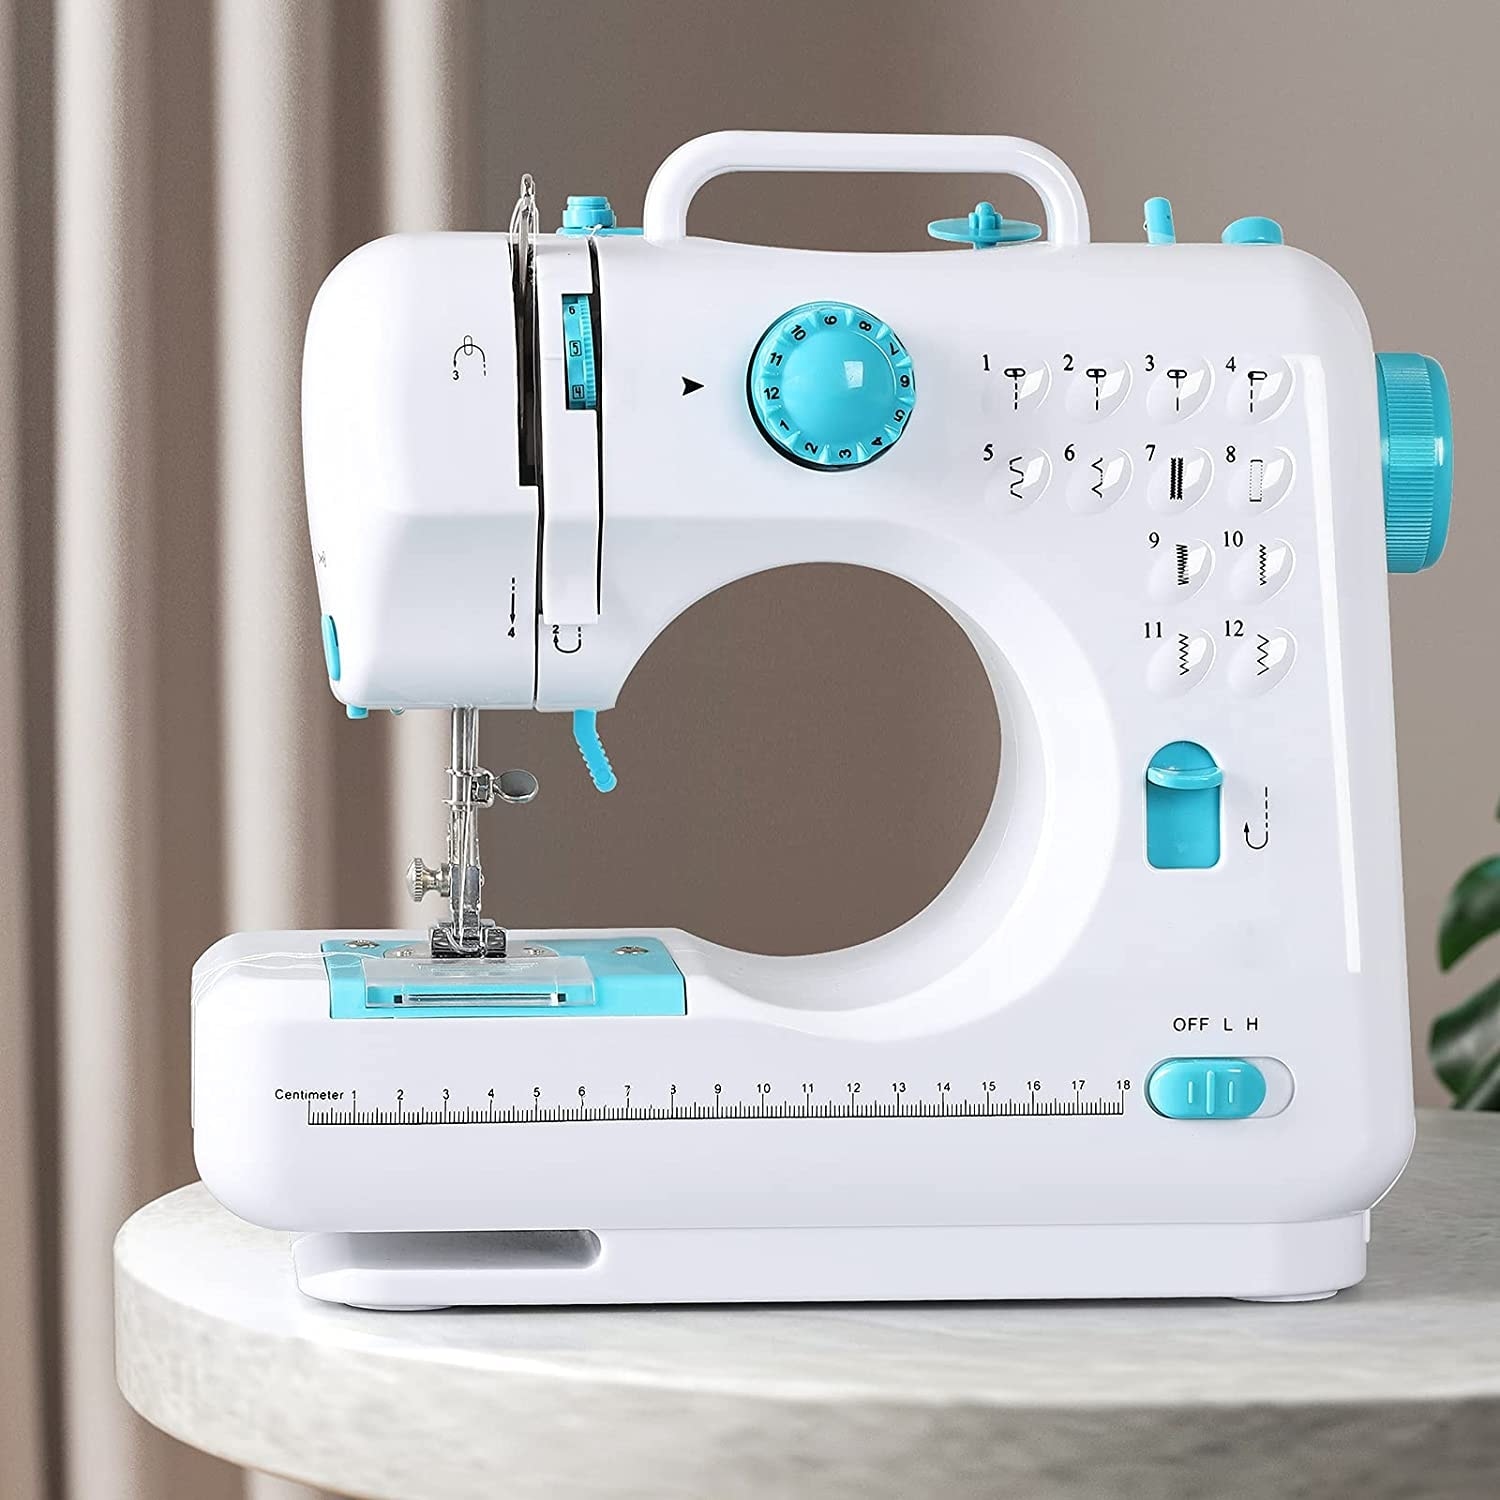 Mini Electric Sewing Machine Portable Function Sewing Machine 12 Kinds Of  Sewing Extended With A Table With A Needle Set Small Sewing Machine Compact  Sewing Machine For Beginners Speed Adjustable Reve